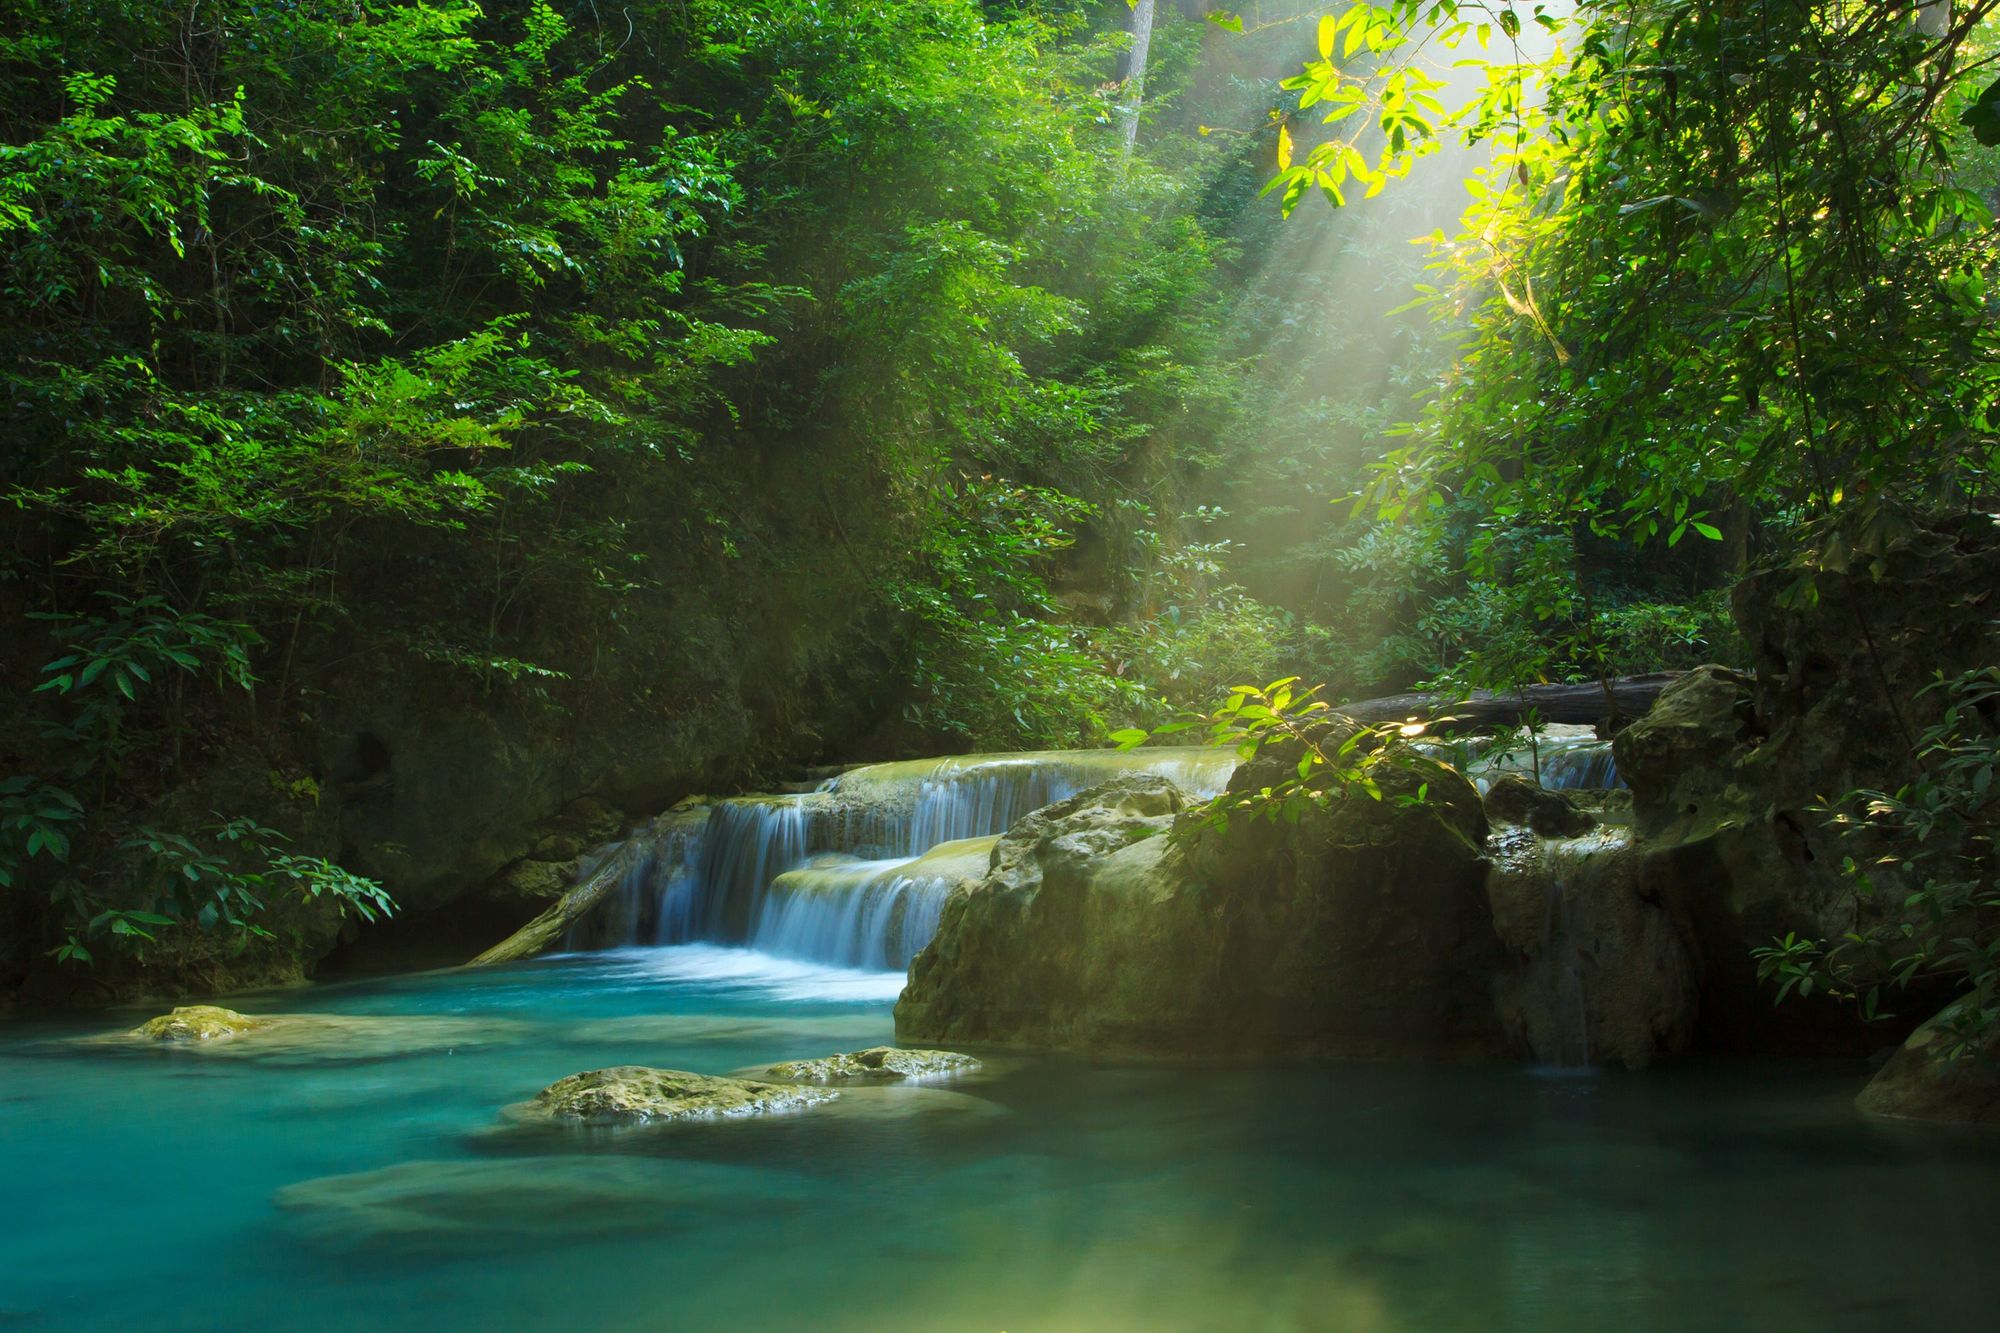 The type of scenery you'll be likely to encounter, if you find the Secret Garden. Photo: Getty